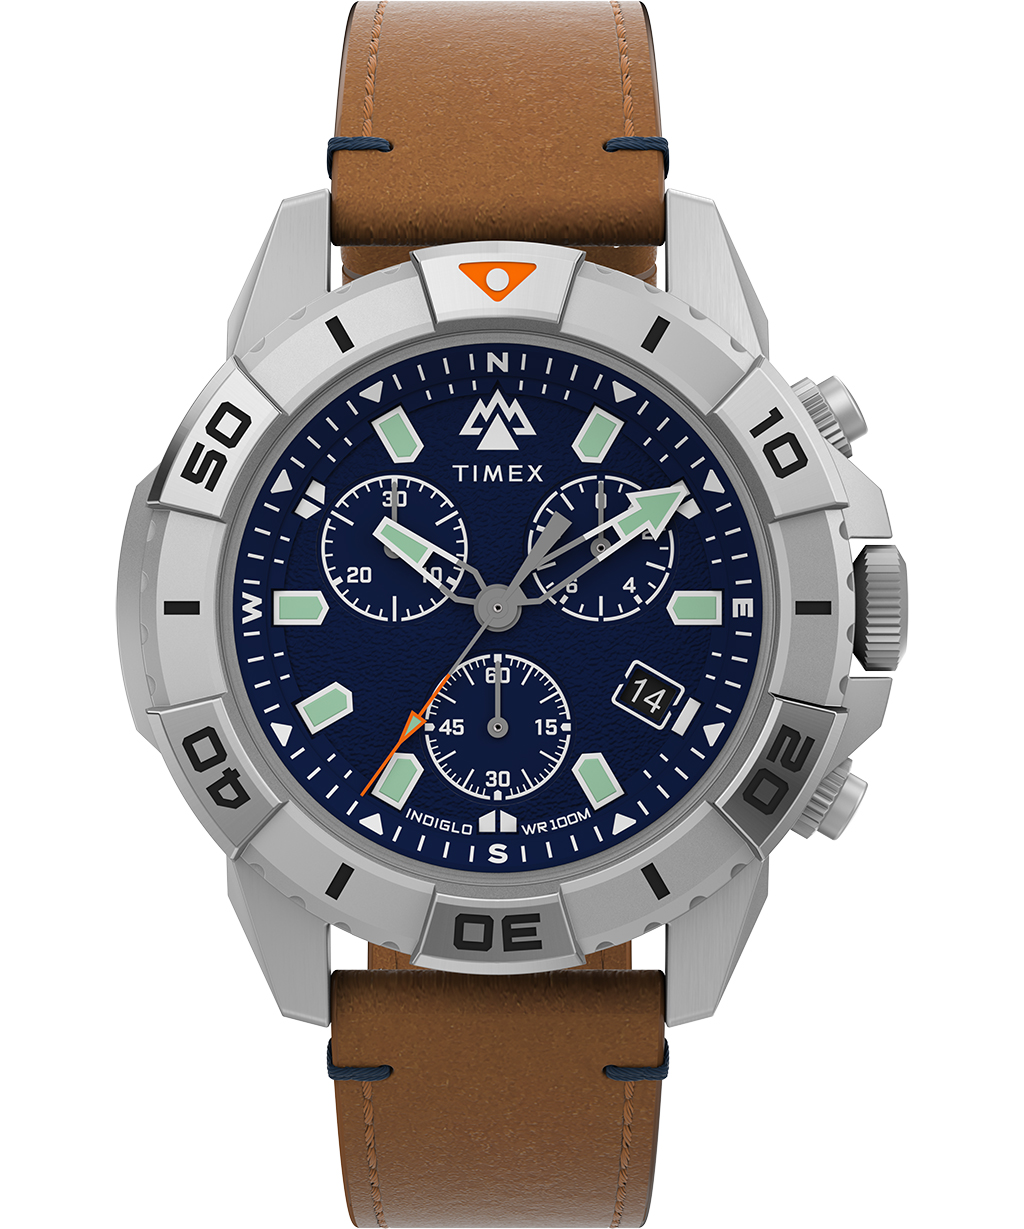 TIMEX EXPEDITION NORTH lifestyle